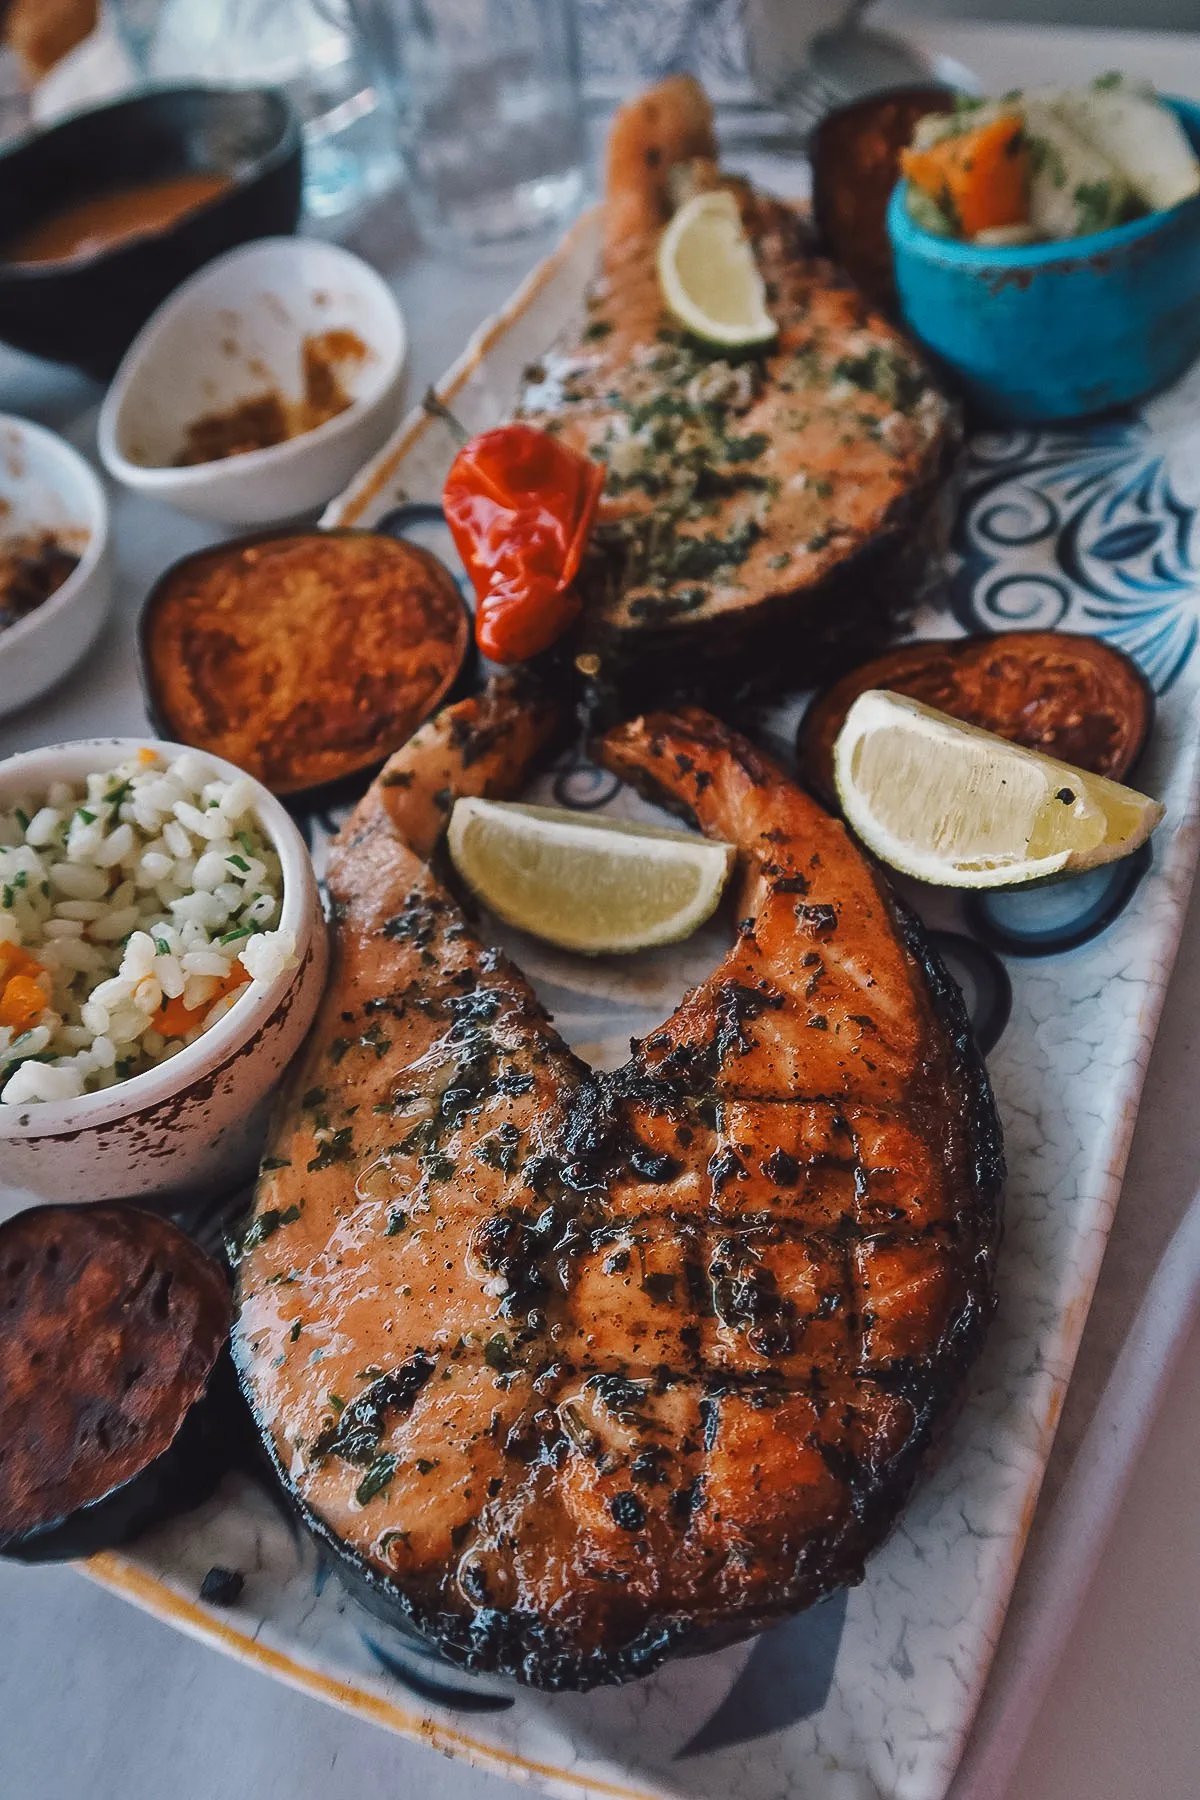 Grilled salmon at a restaurant in Marrakech